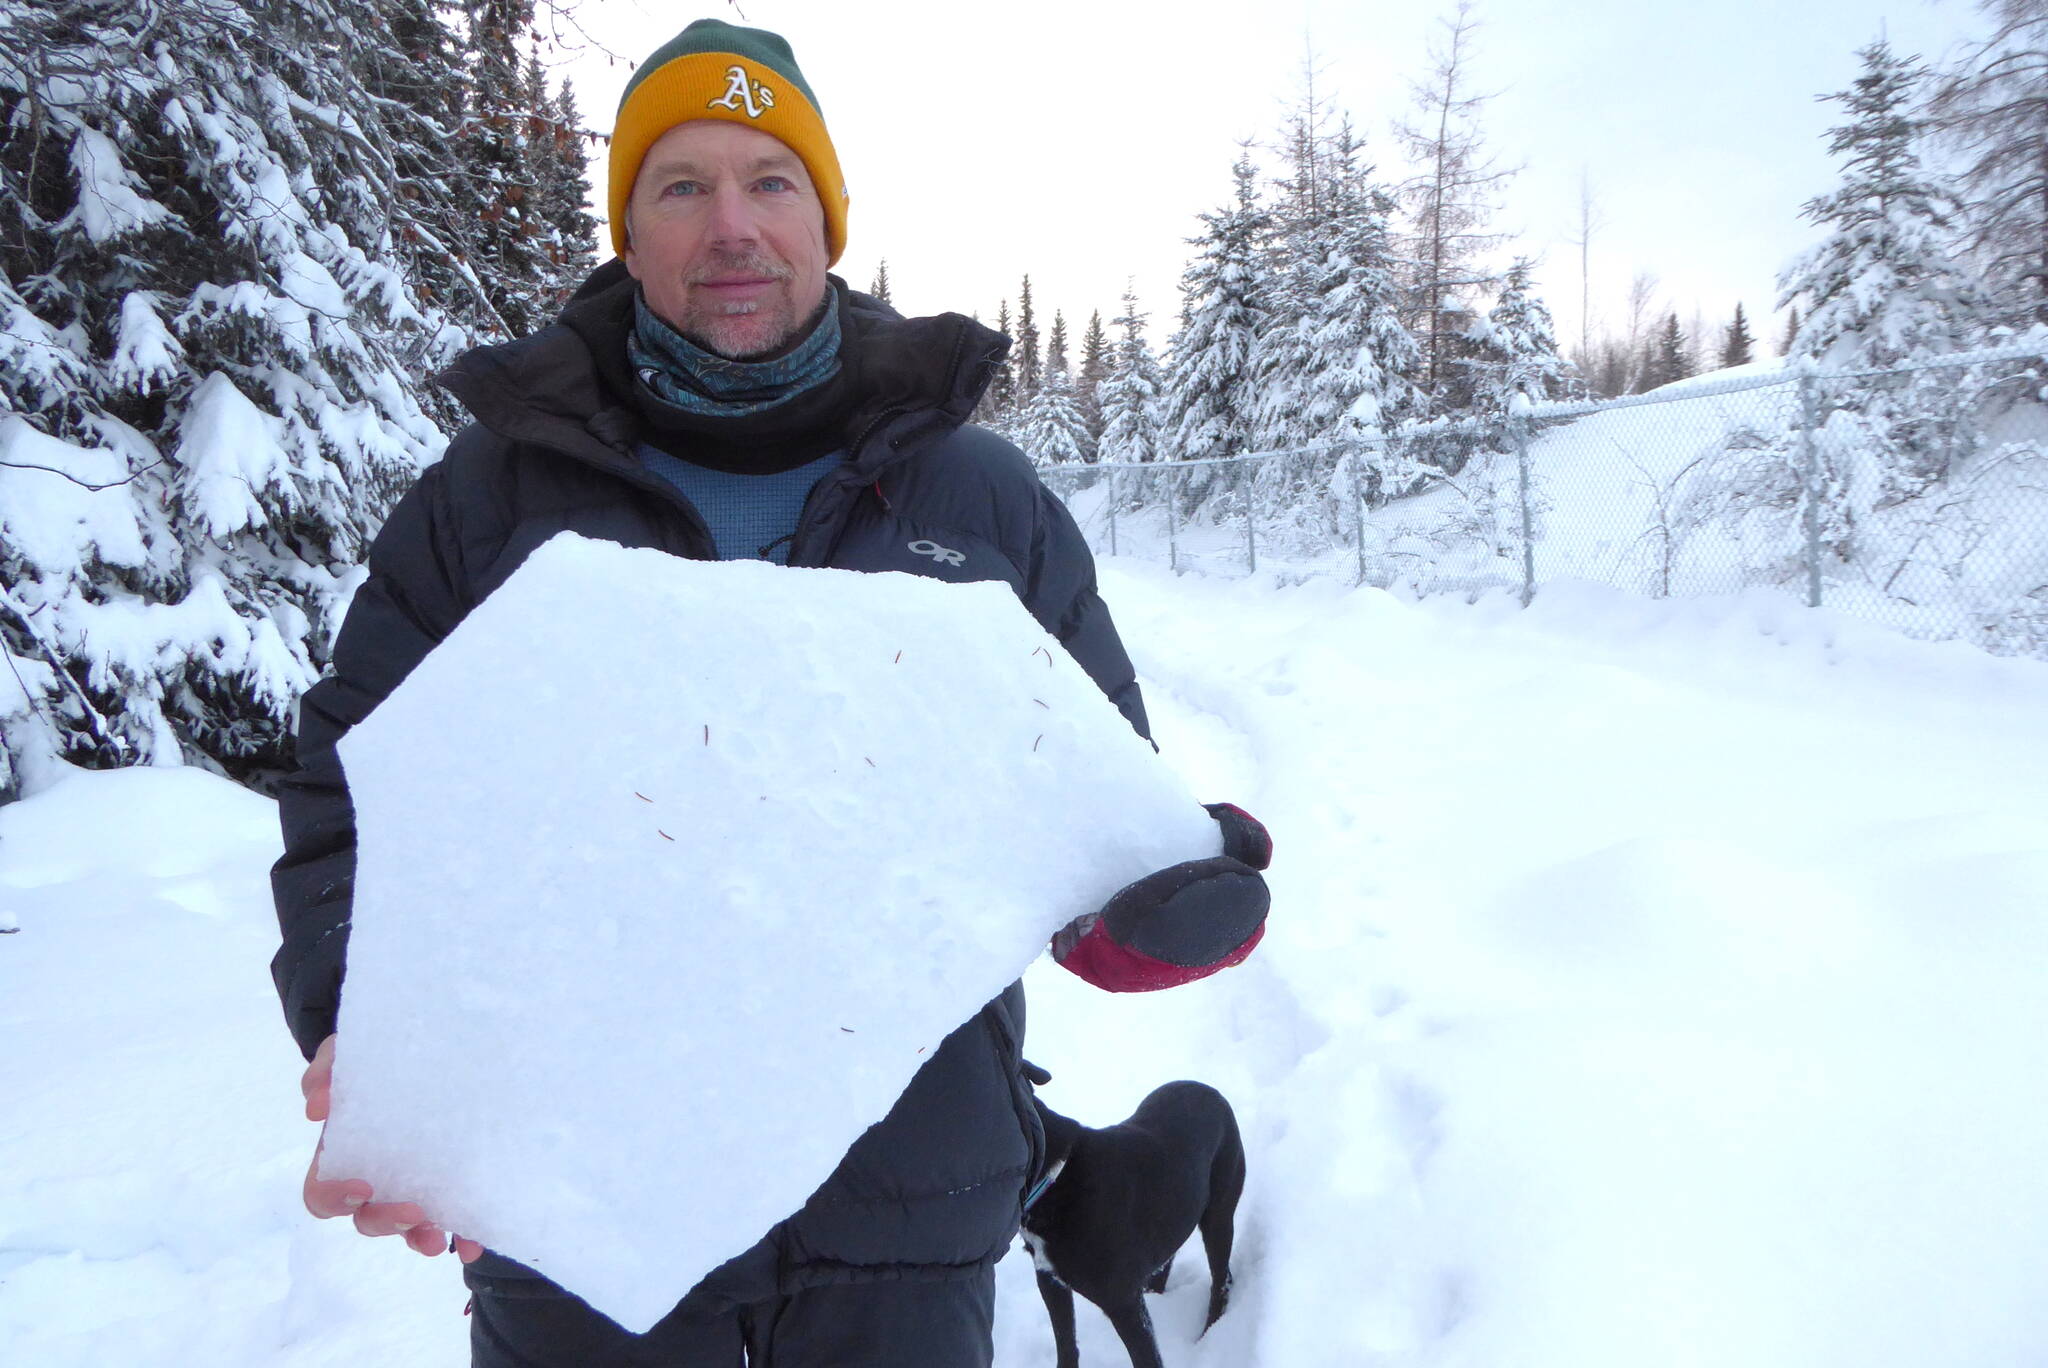 Ned Rozell holds a shard of ice crust, one-inch thick, that lurks in the middle of the Fairbanks snowpack. (Courtesy Photo / Kristen Rozell)